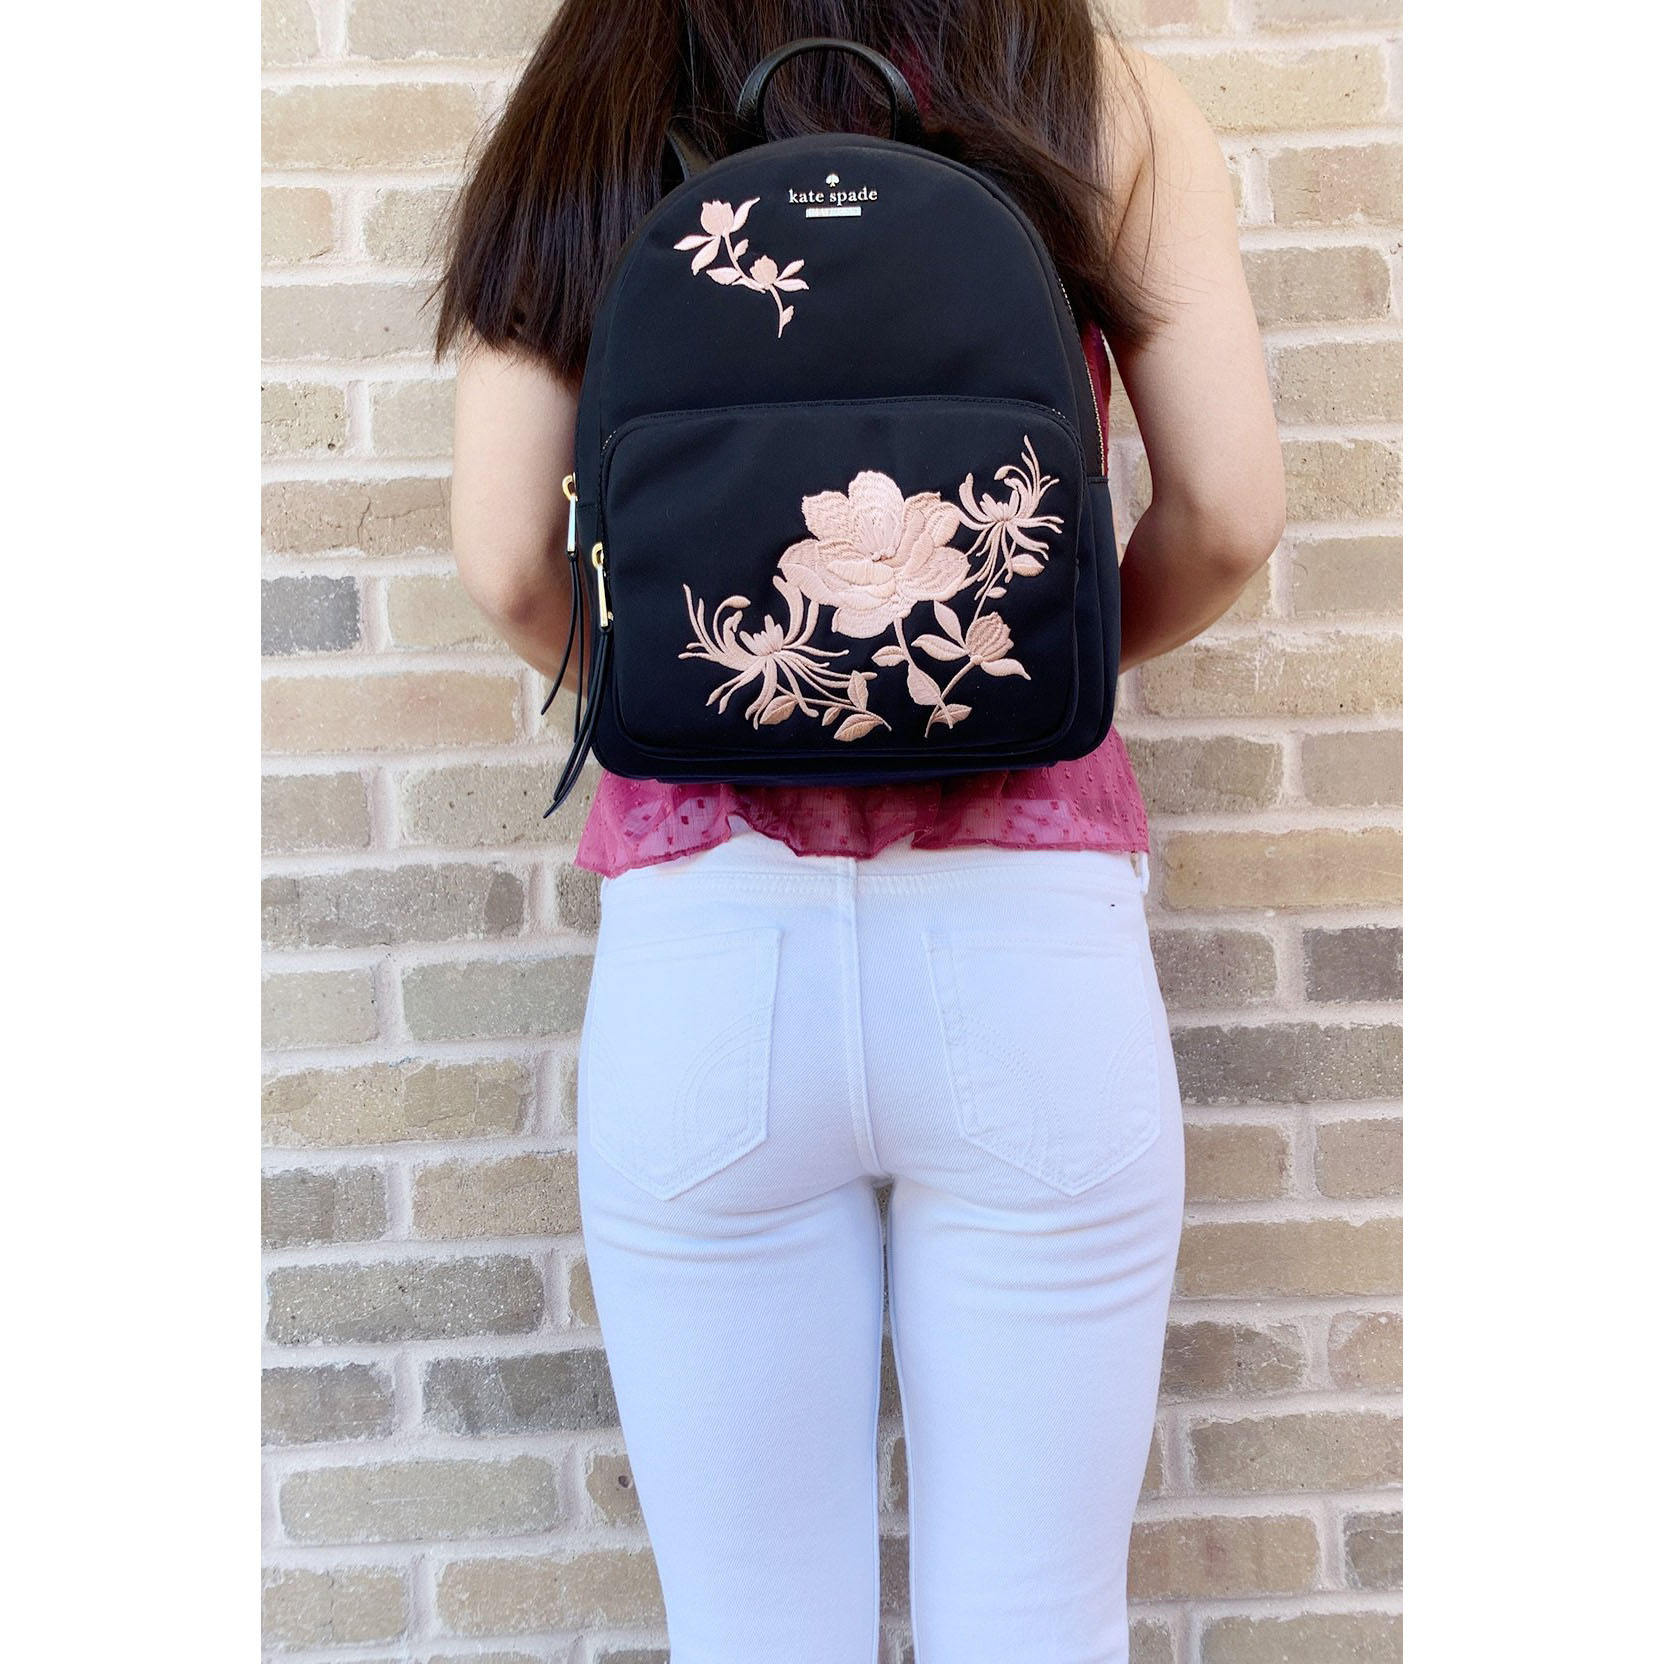 Kate Spade Backpack In Gift Box Dawn Place Embroidered Small Noria Backpack Black / Warm Vellum Beige Nude # WKRU5712